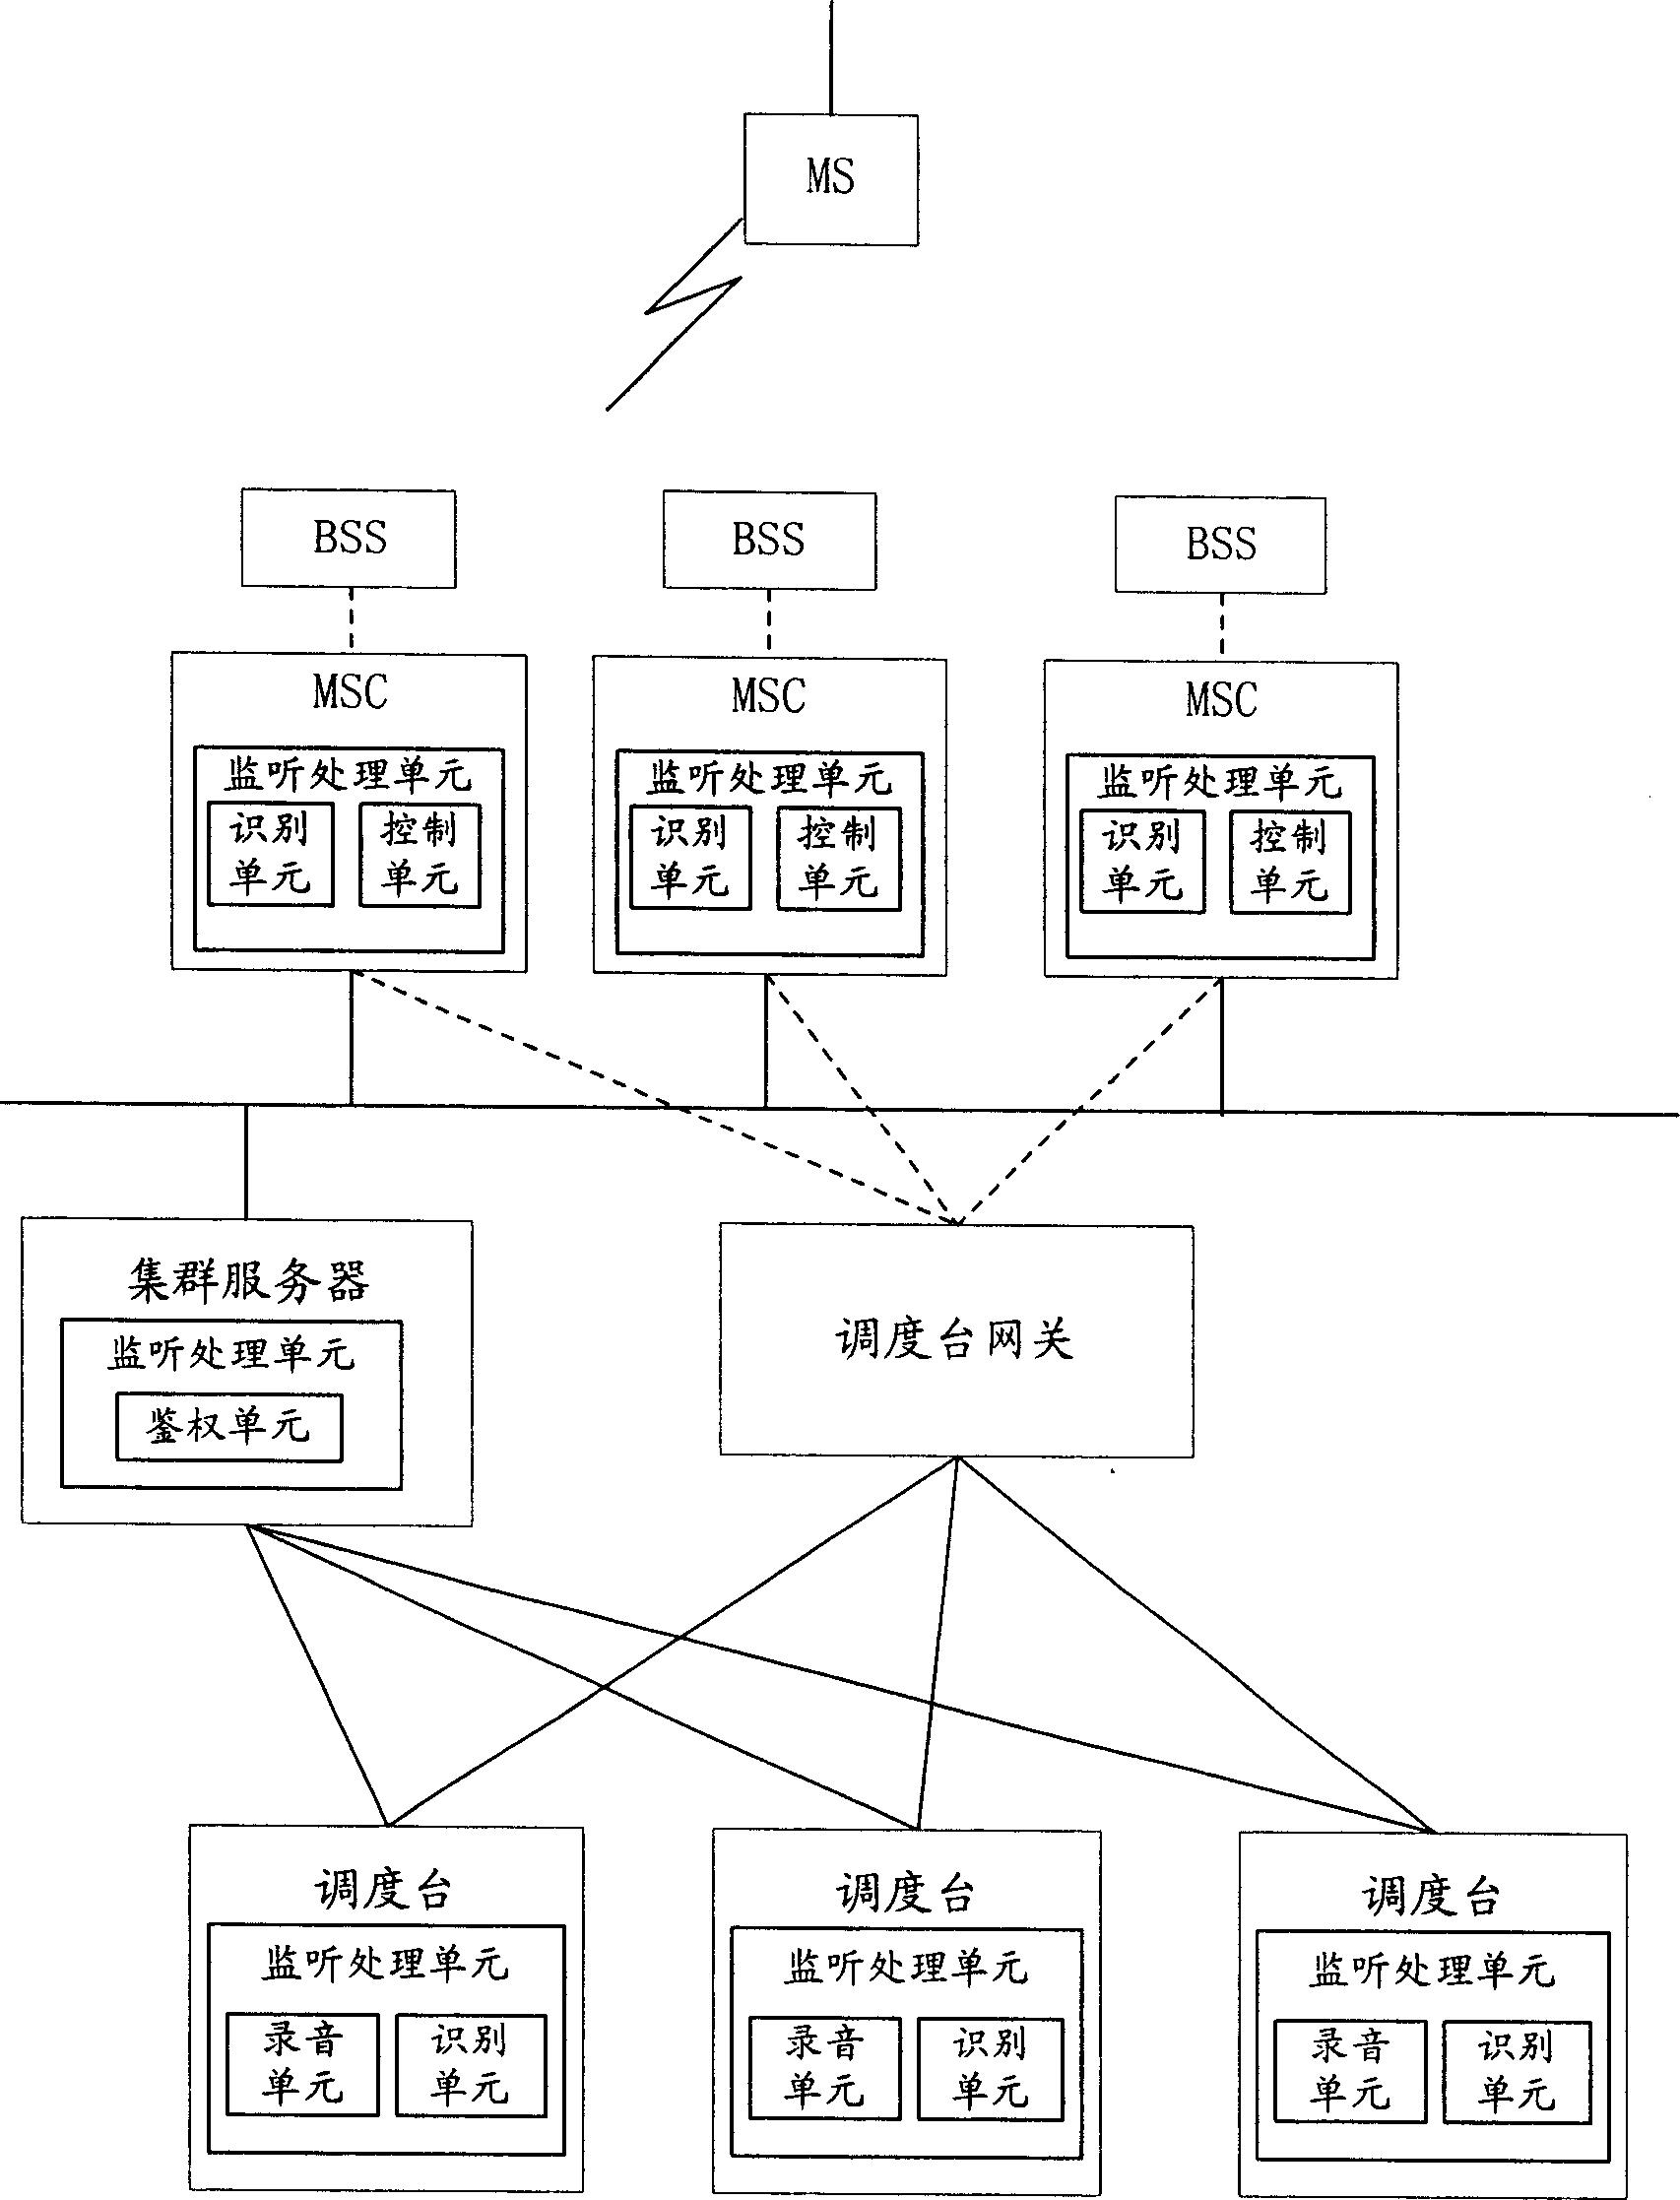 Method for monitoring cluster service process and cluster communication system